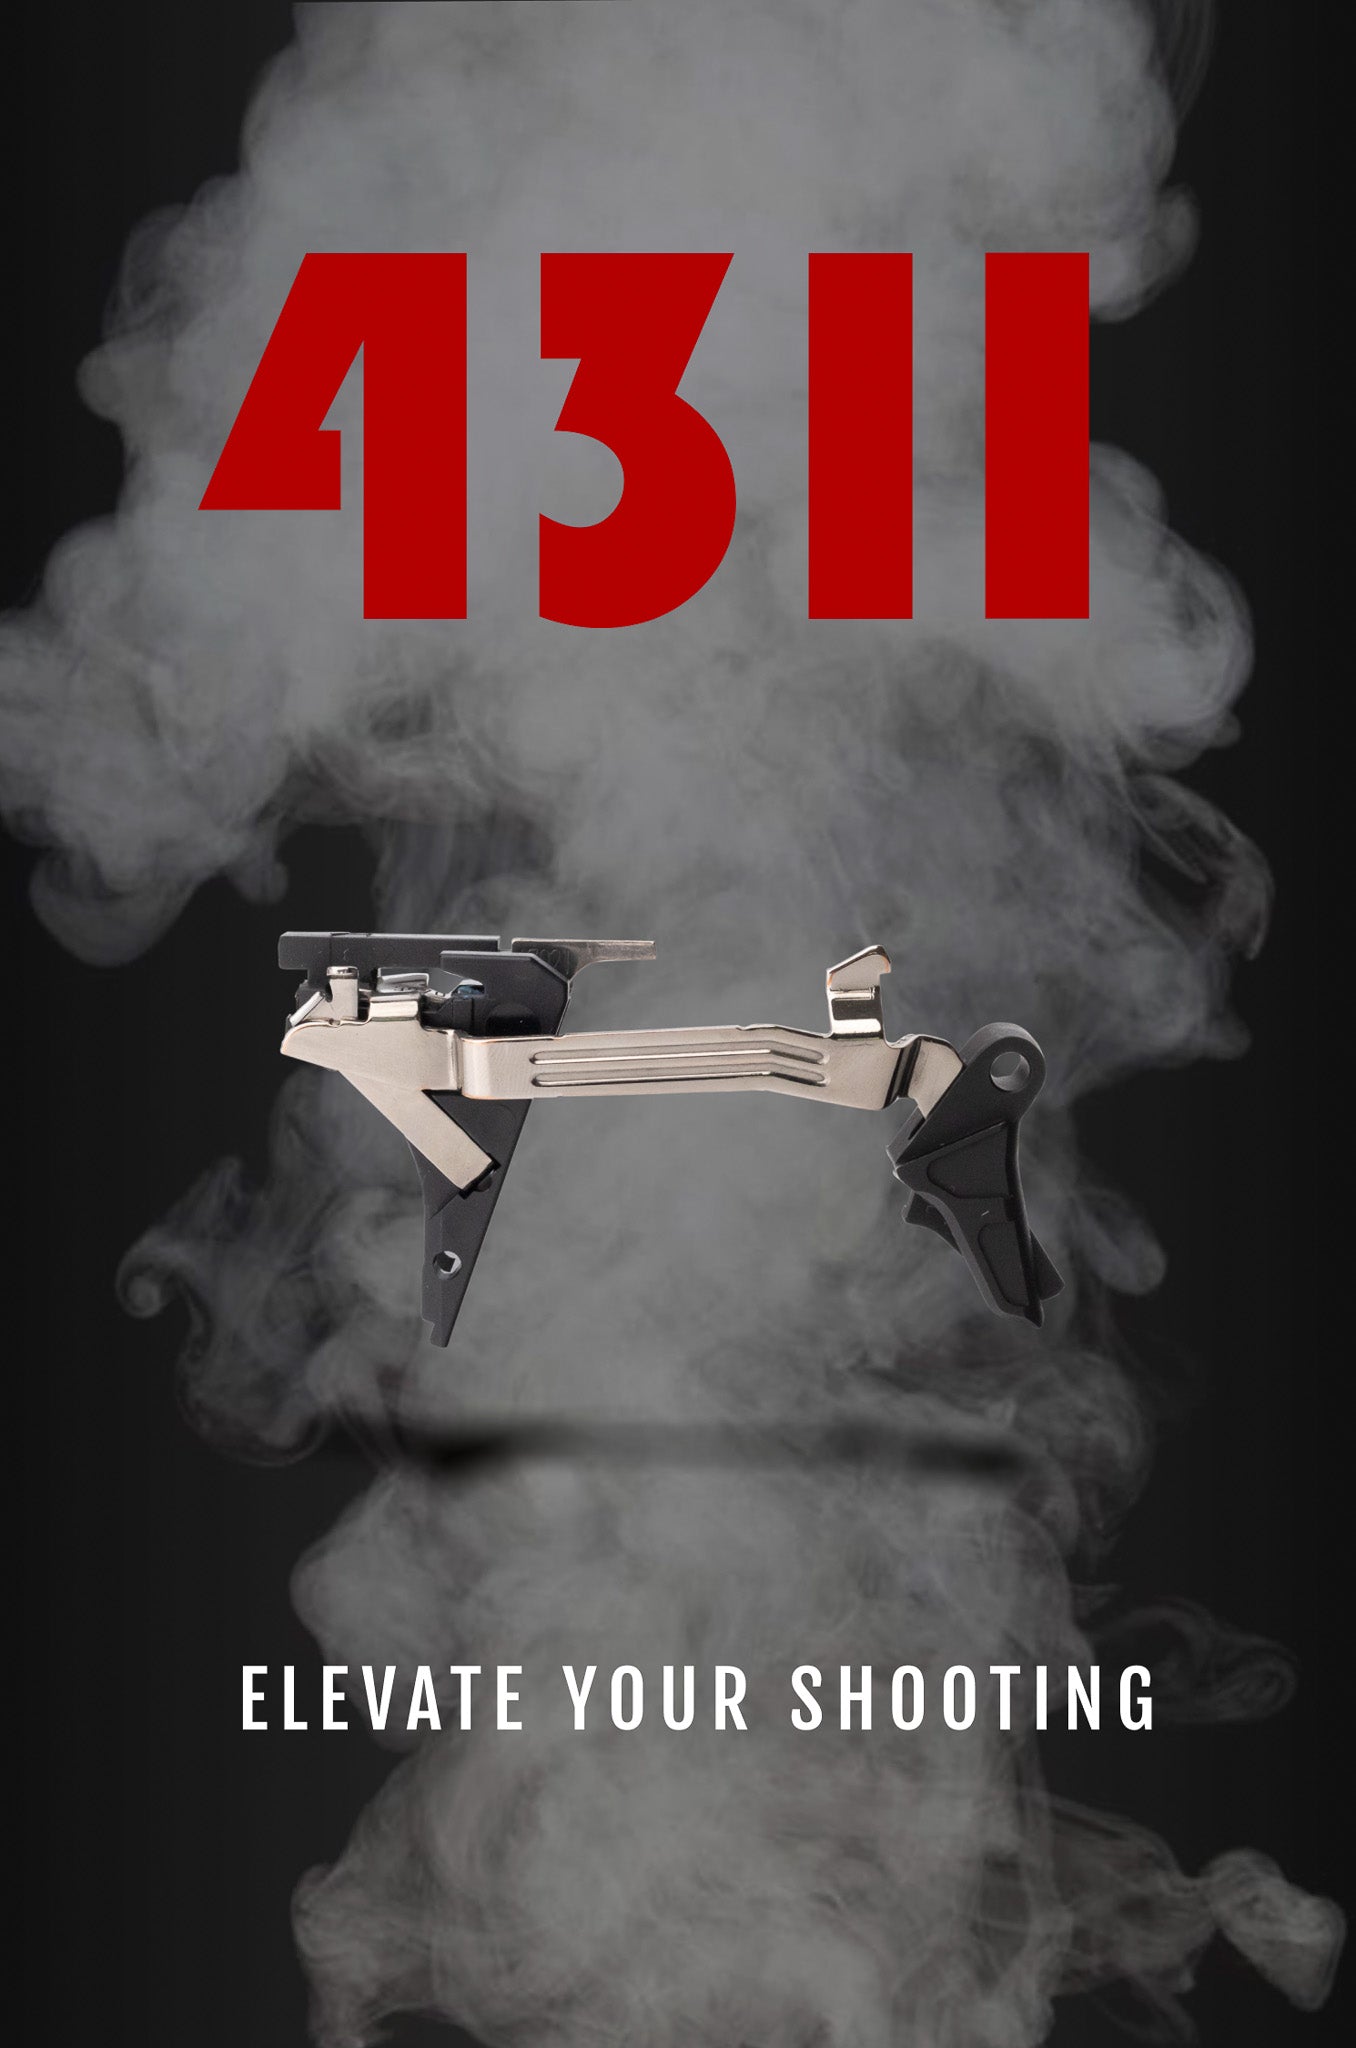 4311 slimline glock trigger kit with the words Elevate your Shooting